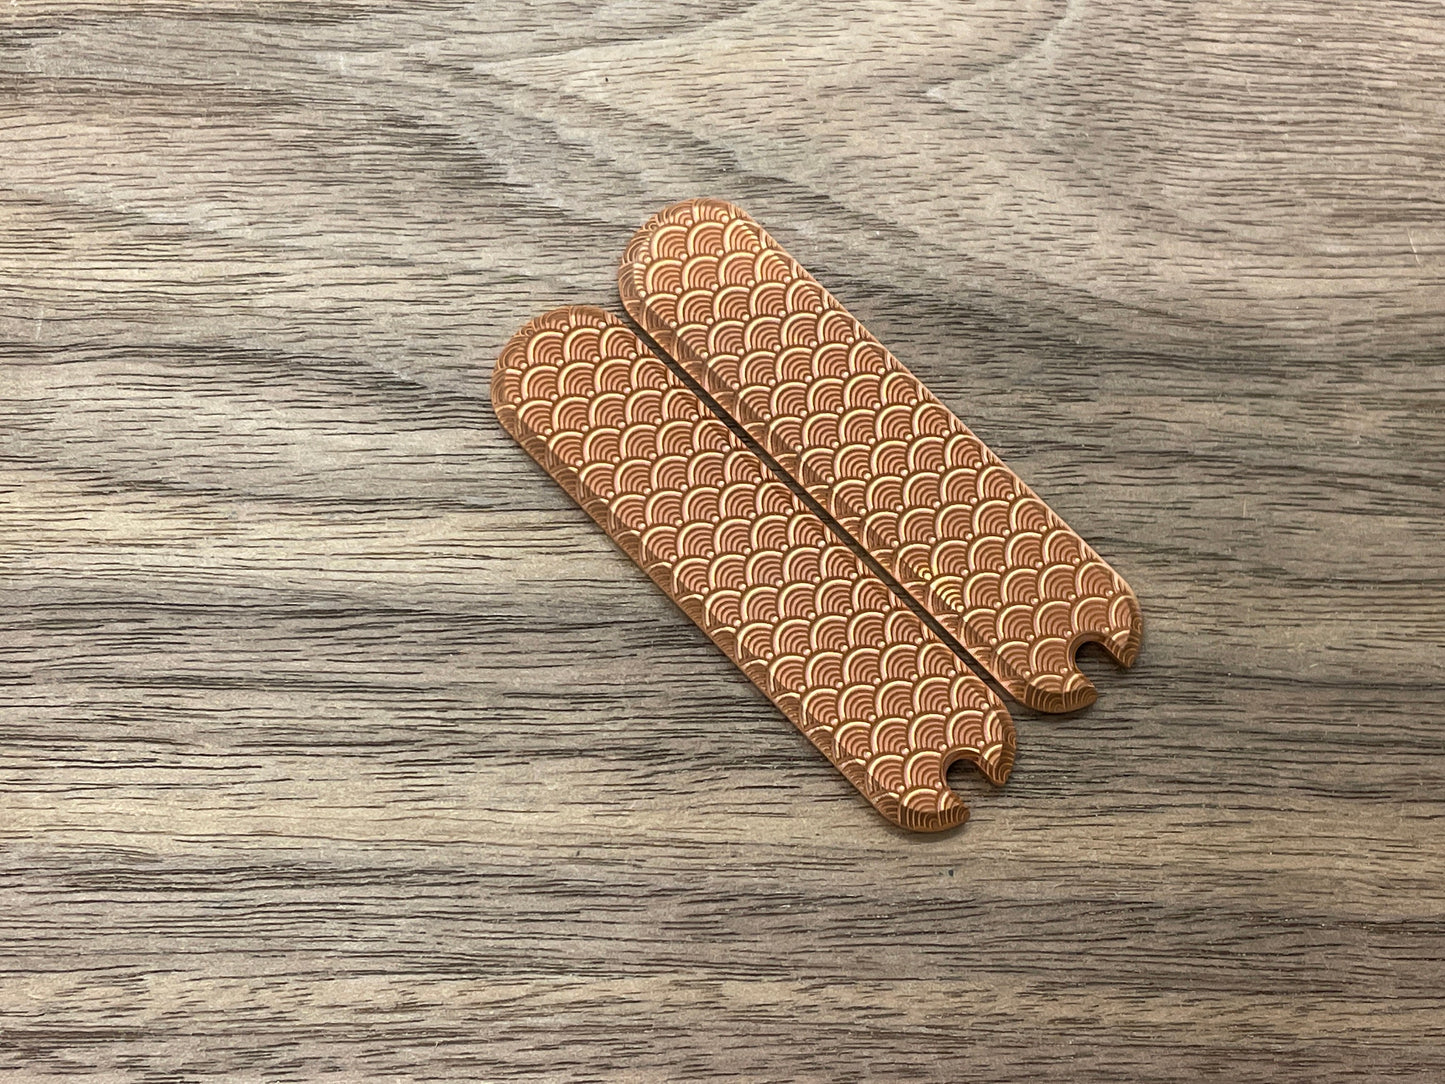 SEIGAIHA 58mm Copper Scales for Swiss Army SAK